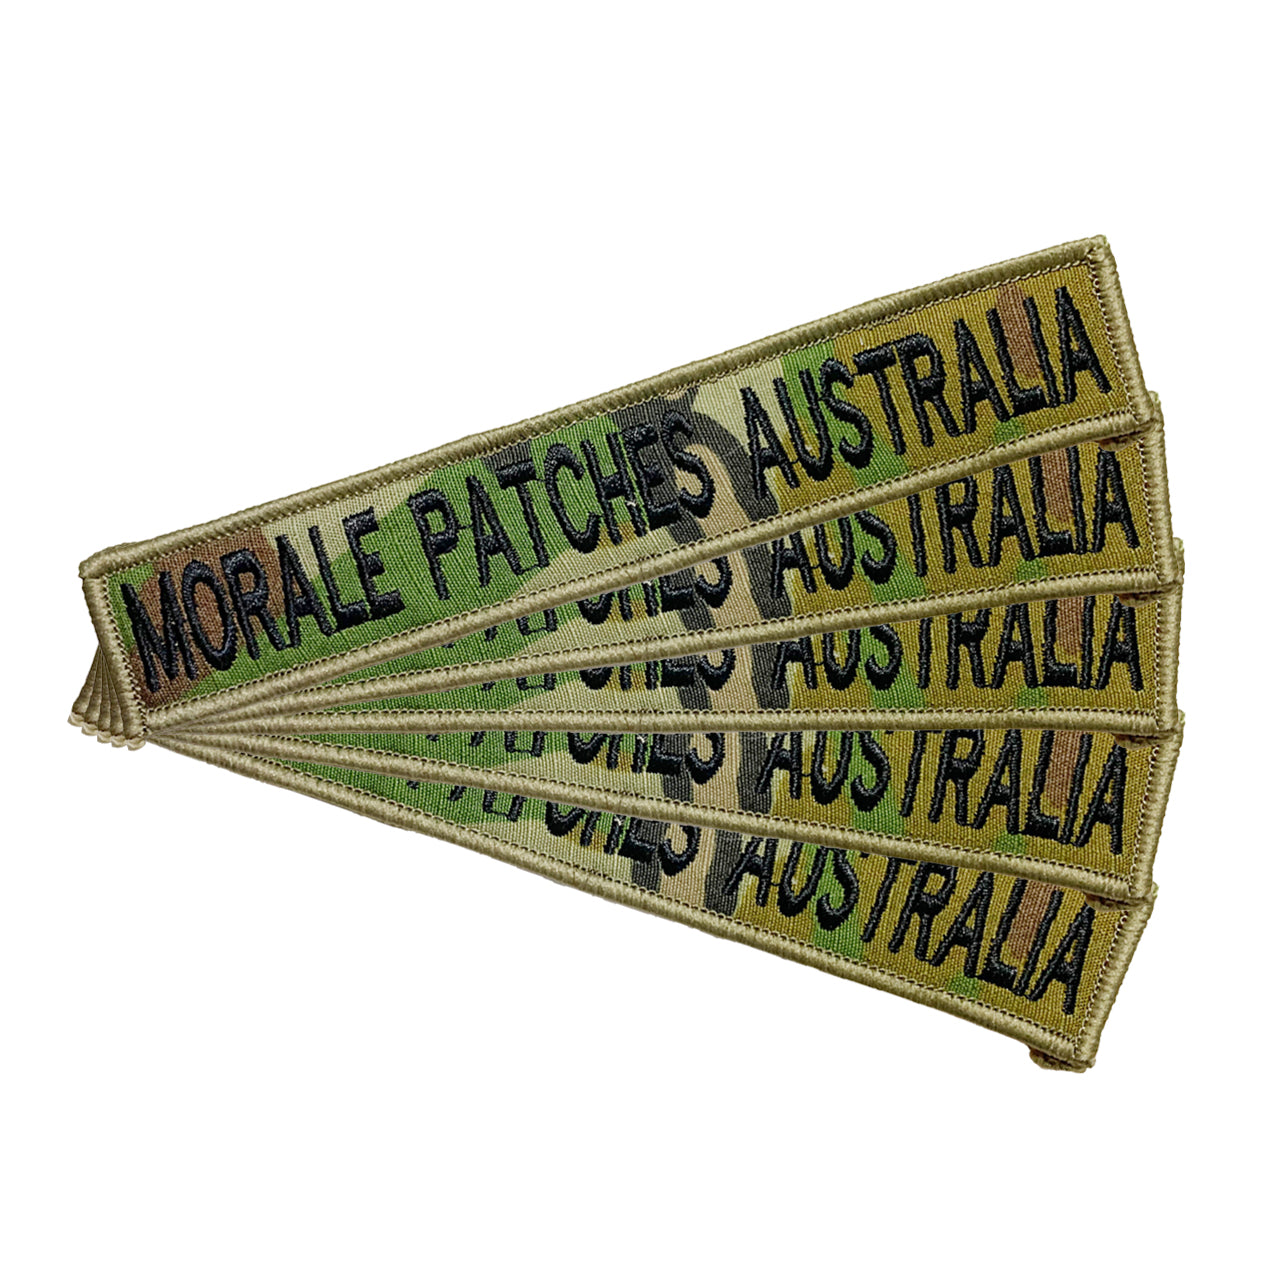 Name tag in AMC material, size is 2.5cm x 15cm, lettering is 1.5cm in height.  All embroidery is done in upper case letters only as a FYI.  These are great for cadets.  Don't forget you can even add the velcro backing and use them on your field gear or even dog vests.  Made on the Gold Coast, please support Australian made www.moralepatches.com.au